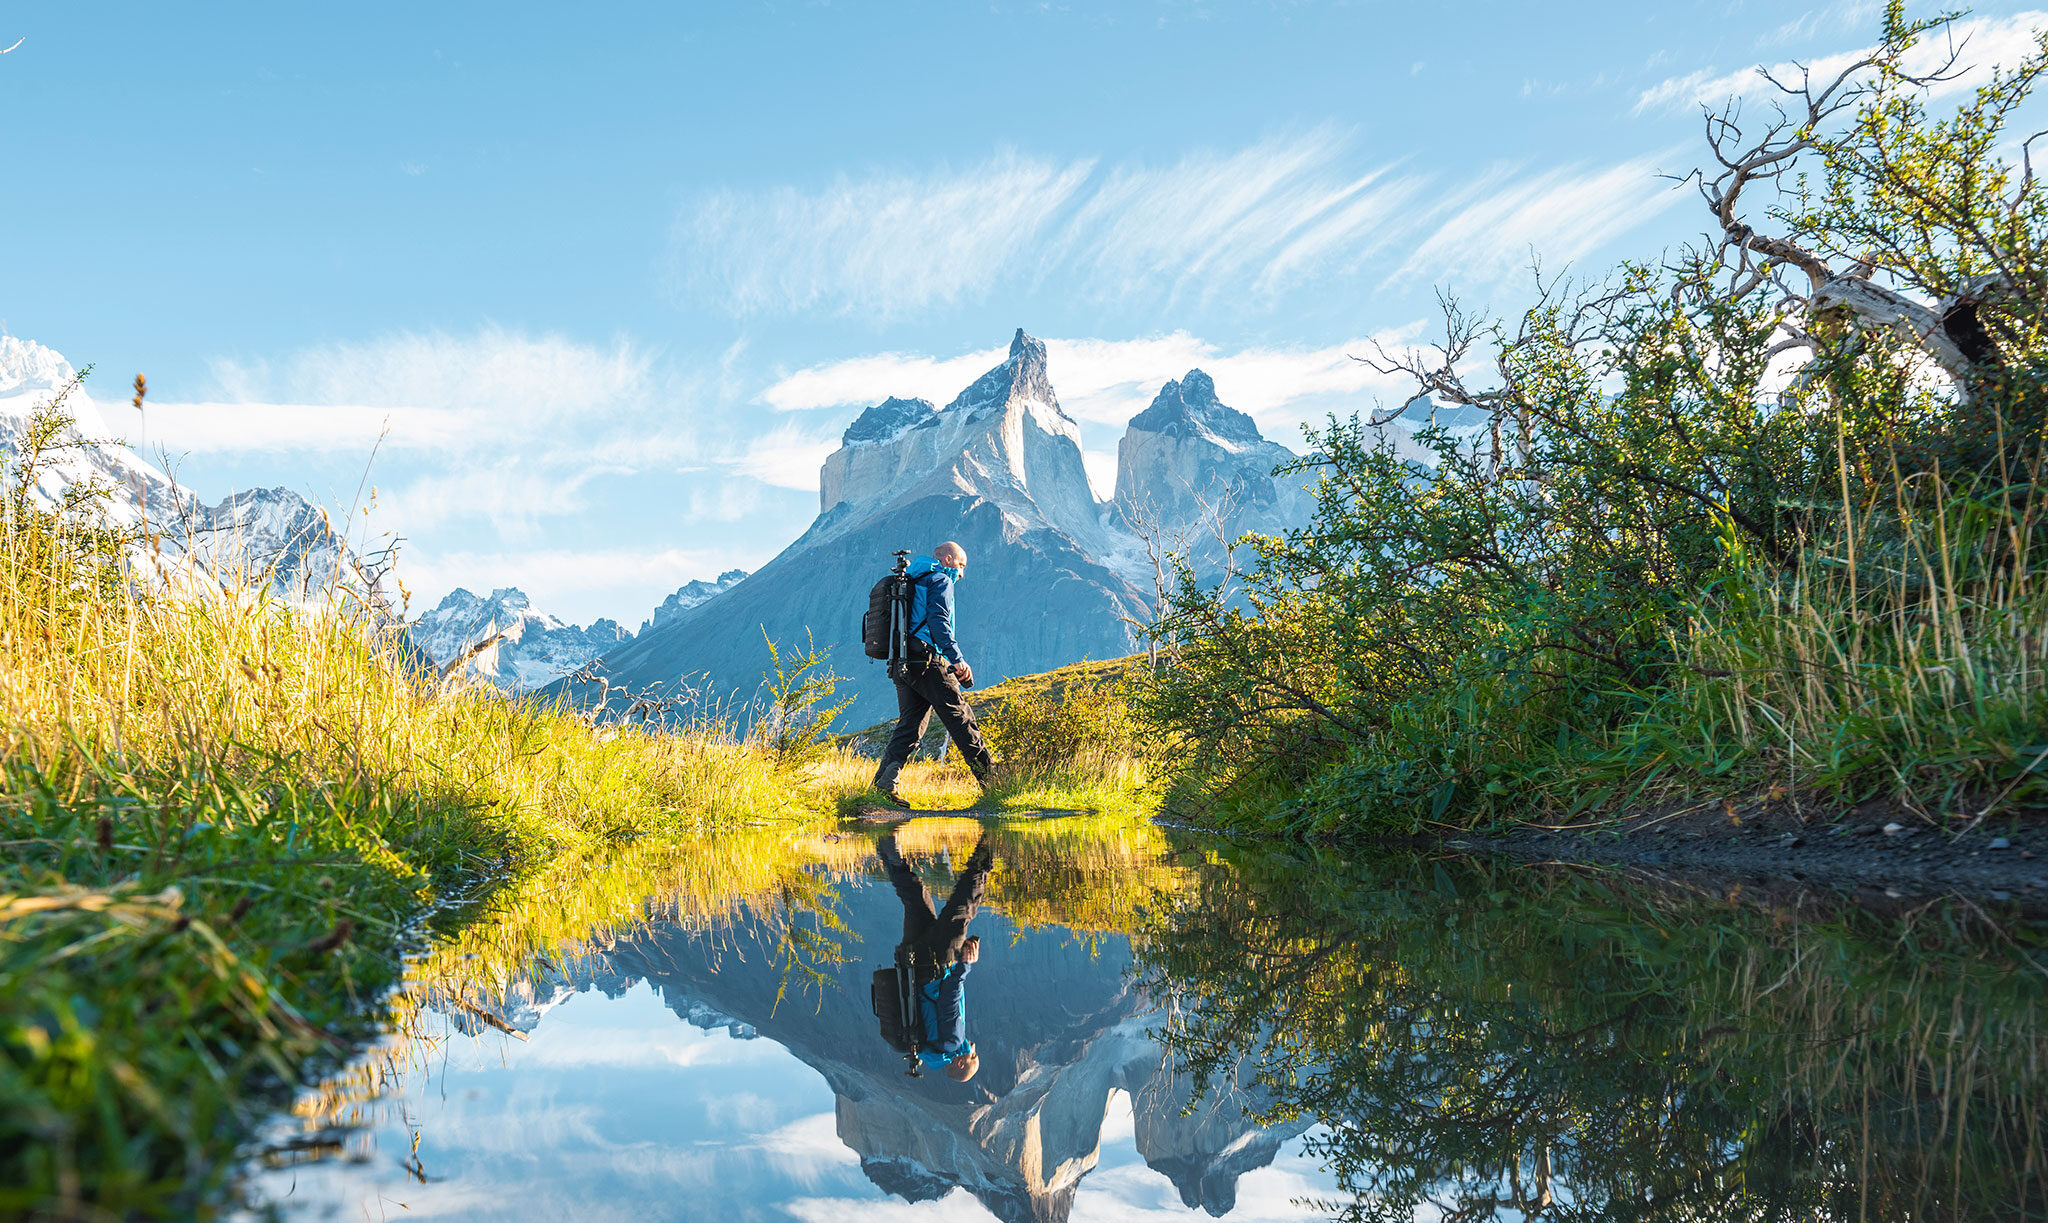 A hiker with photography equipment crosses a pond while sharp mountain peaks rise in the distance.